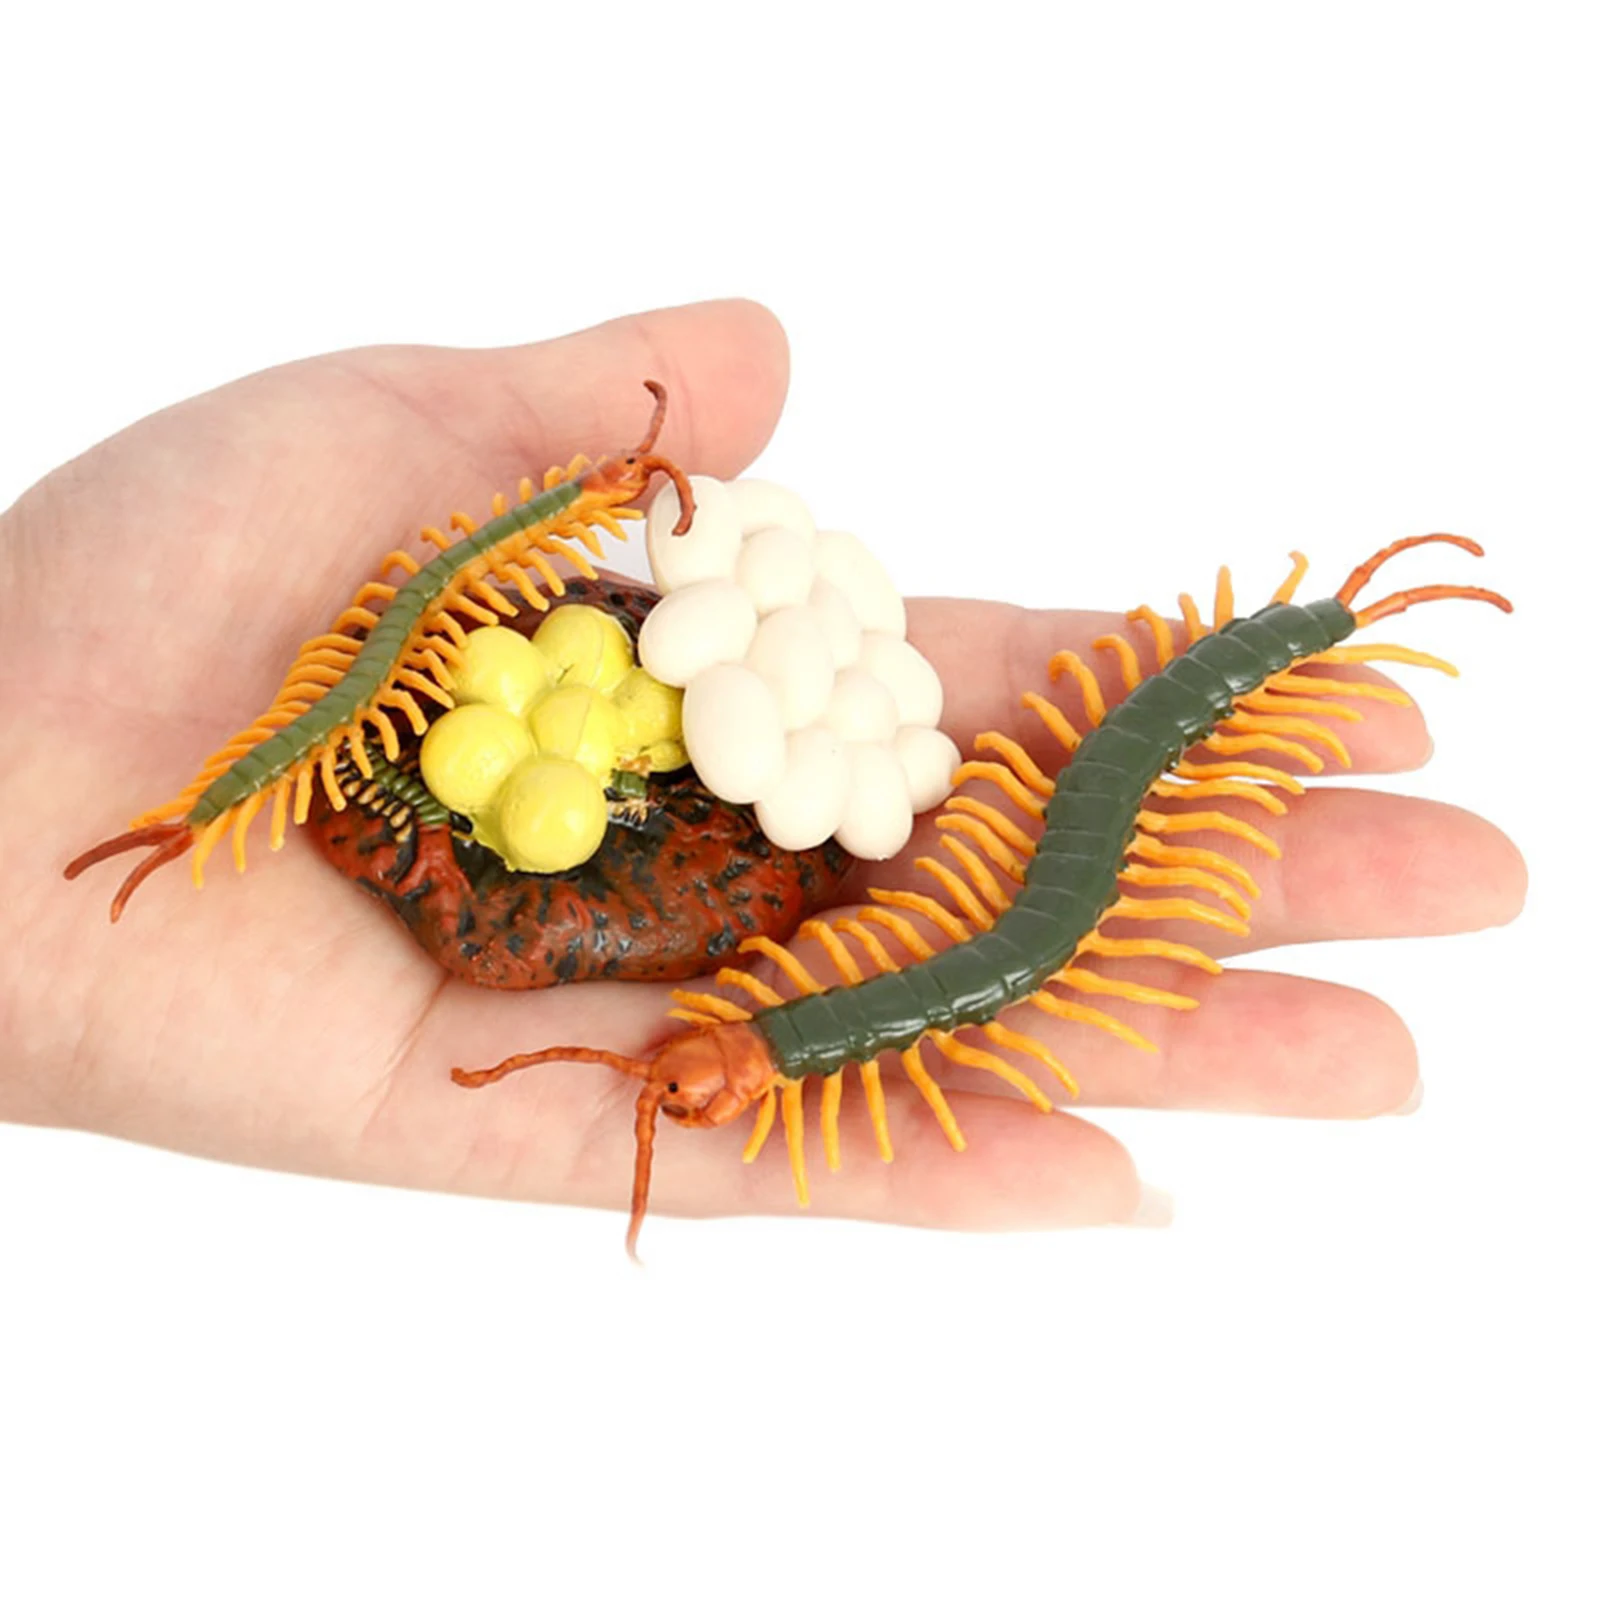 Insects Plastic Centipede Toy Figure 4 Stages Life Cycle of a Centipede 